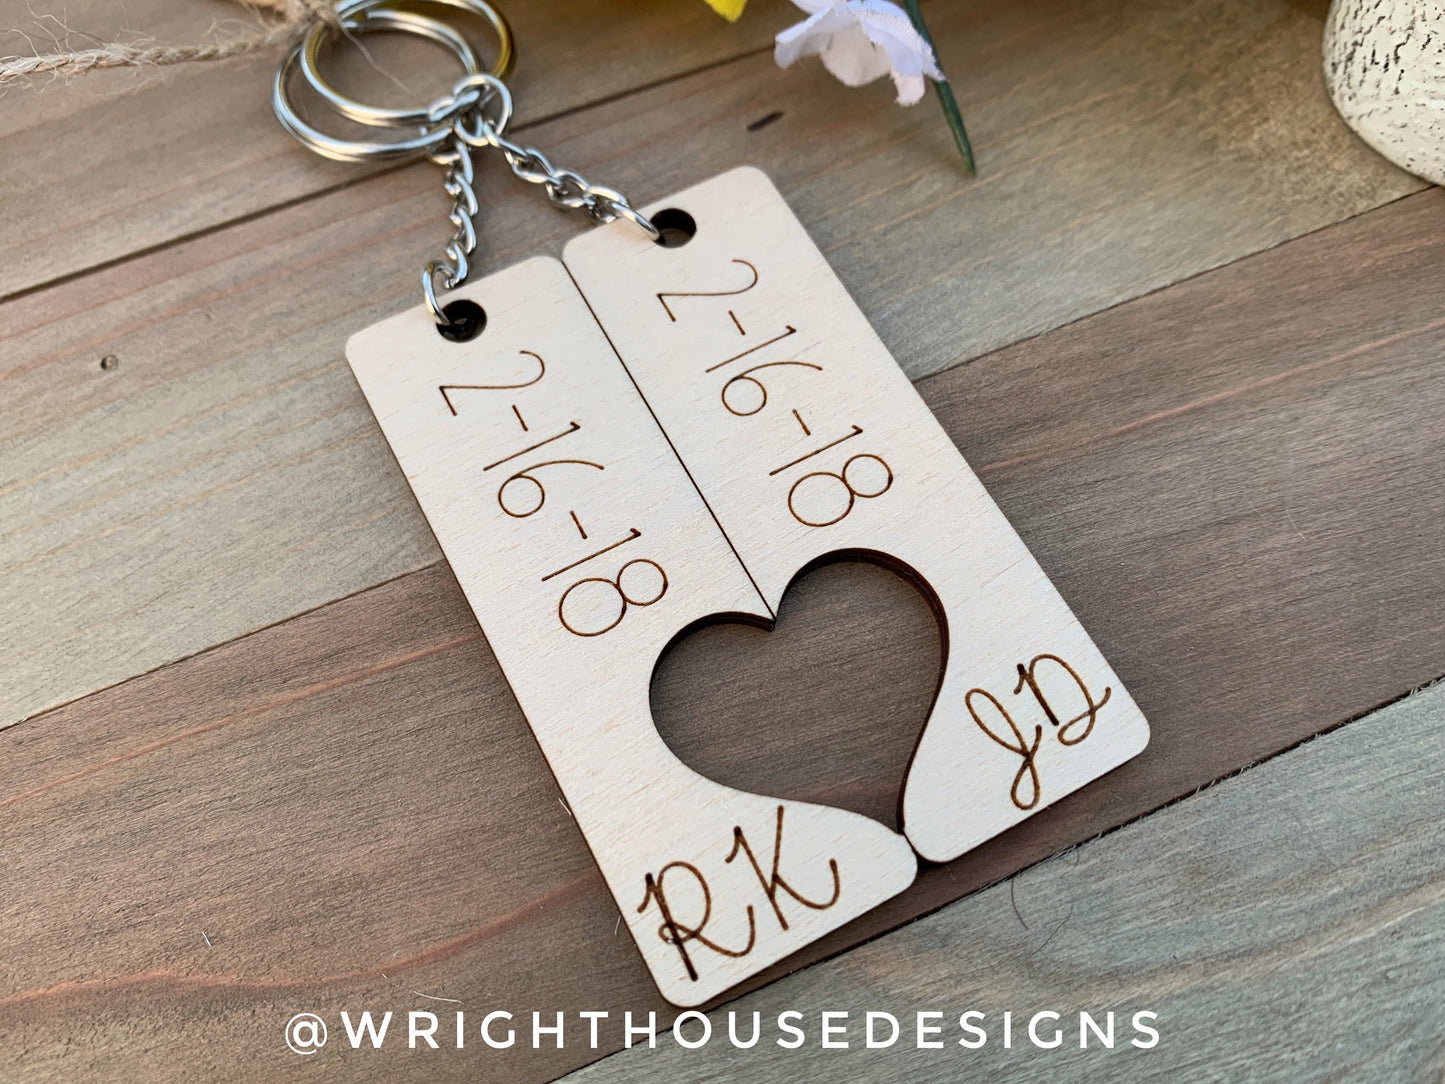 Couples Interlocking Heart Keychains For Valentine's Day - His and Her Personalized Gifts - Digital SVG Cut Files For Glowforge Lasers